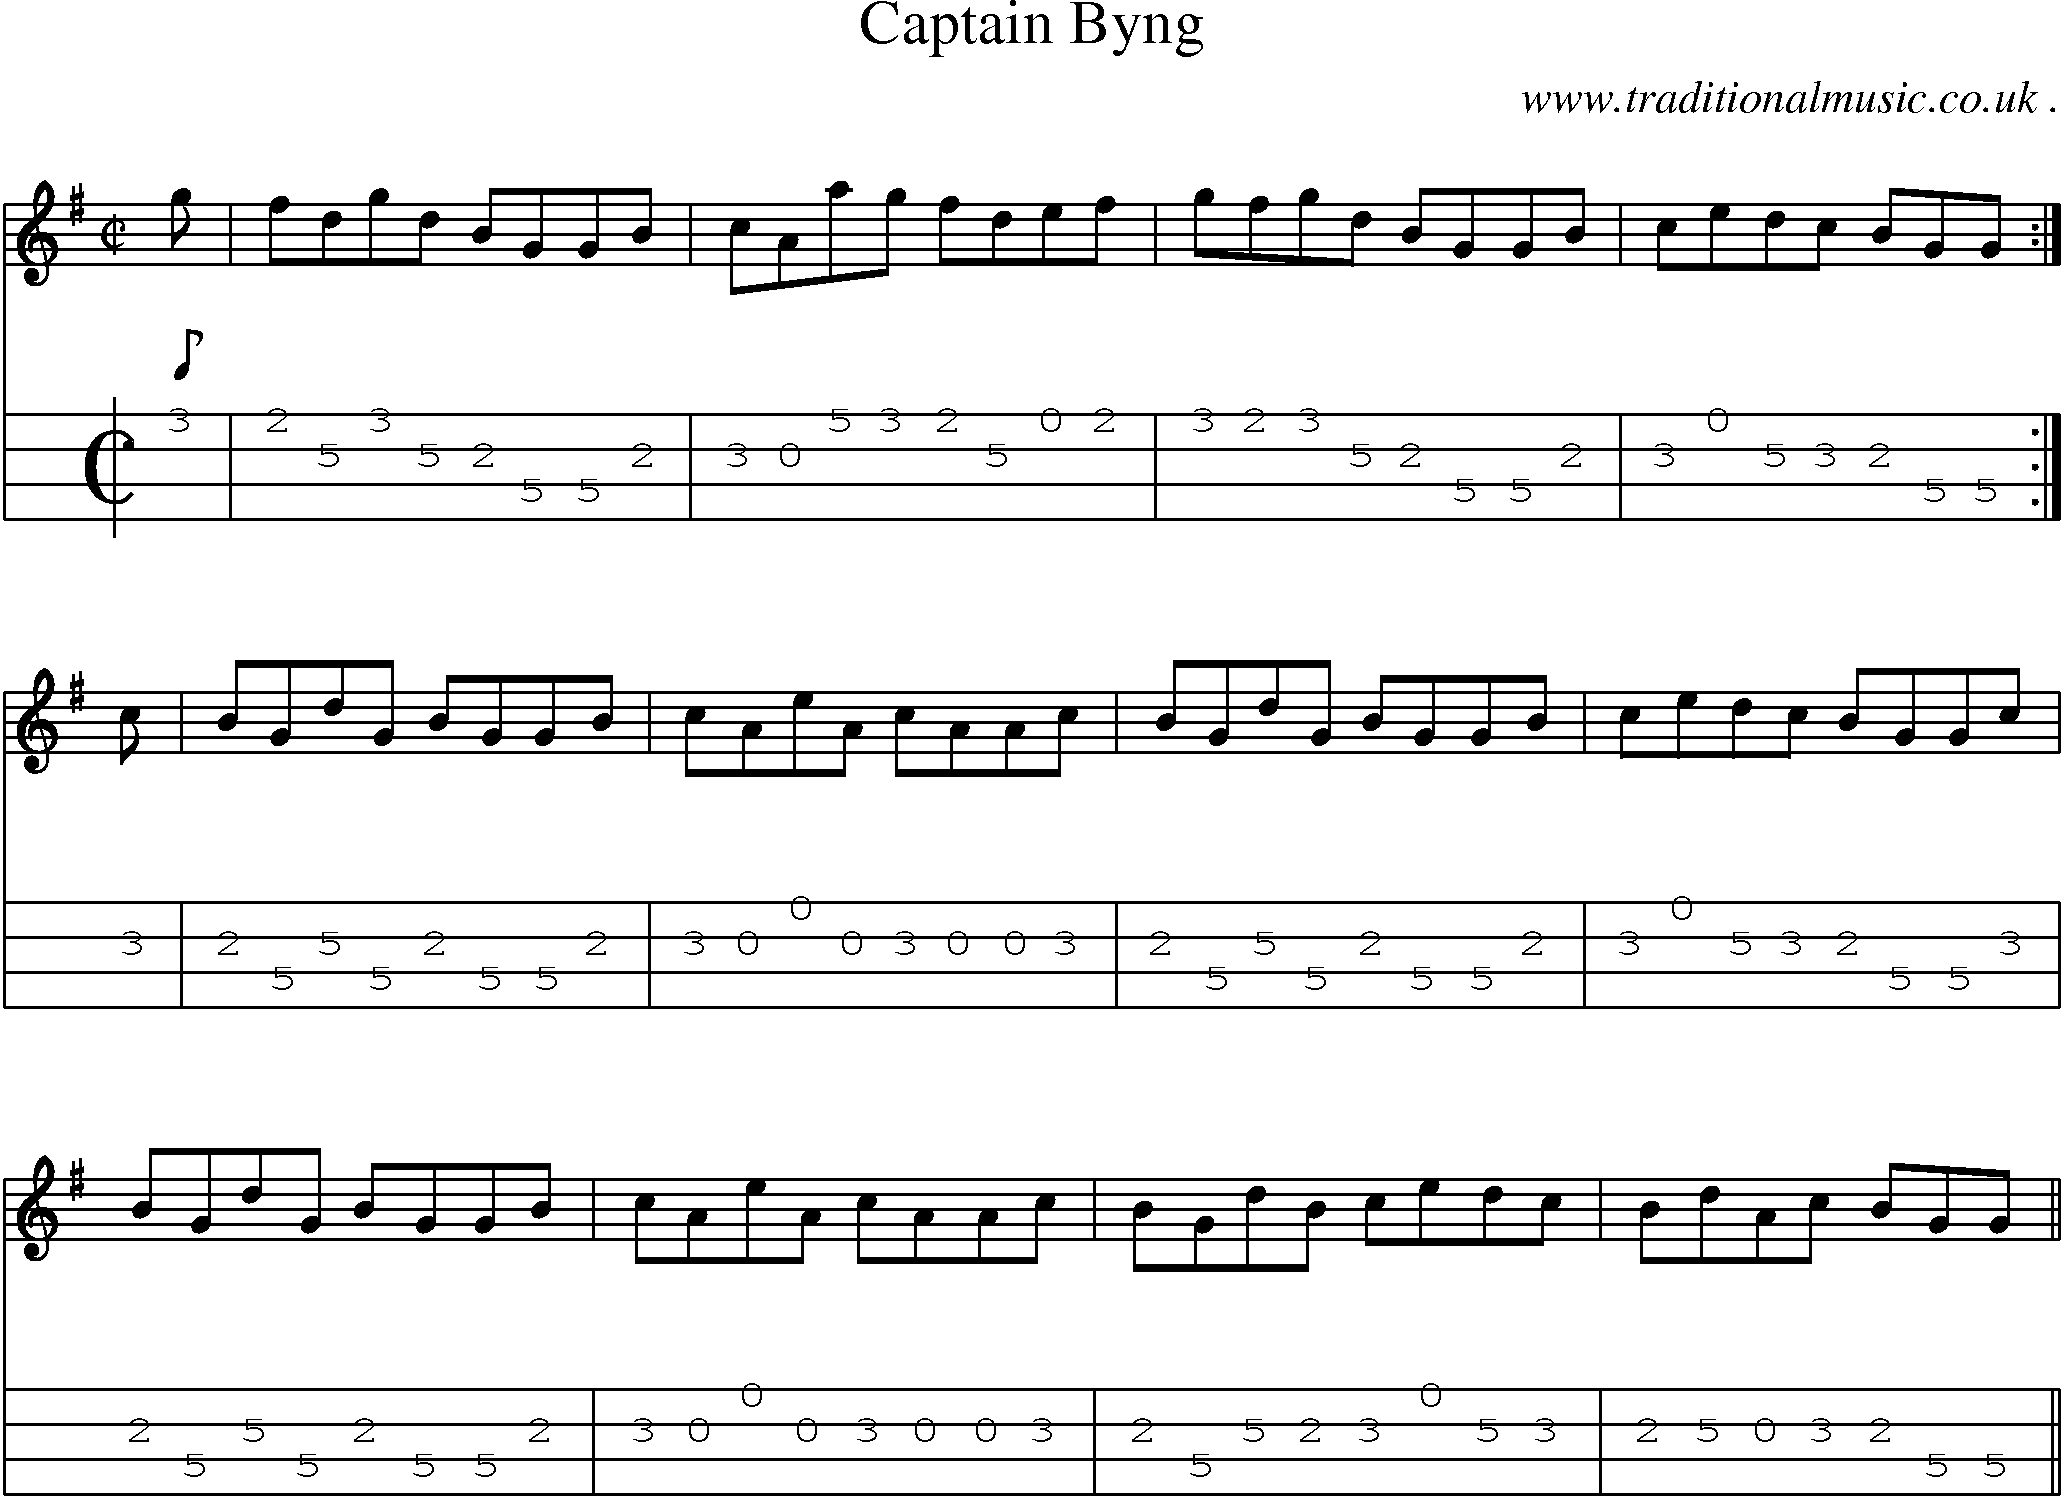 Sheet-music  score, Chords and Mandolin Tabs for Captain Byng